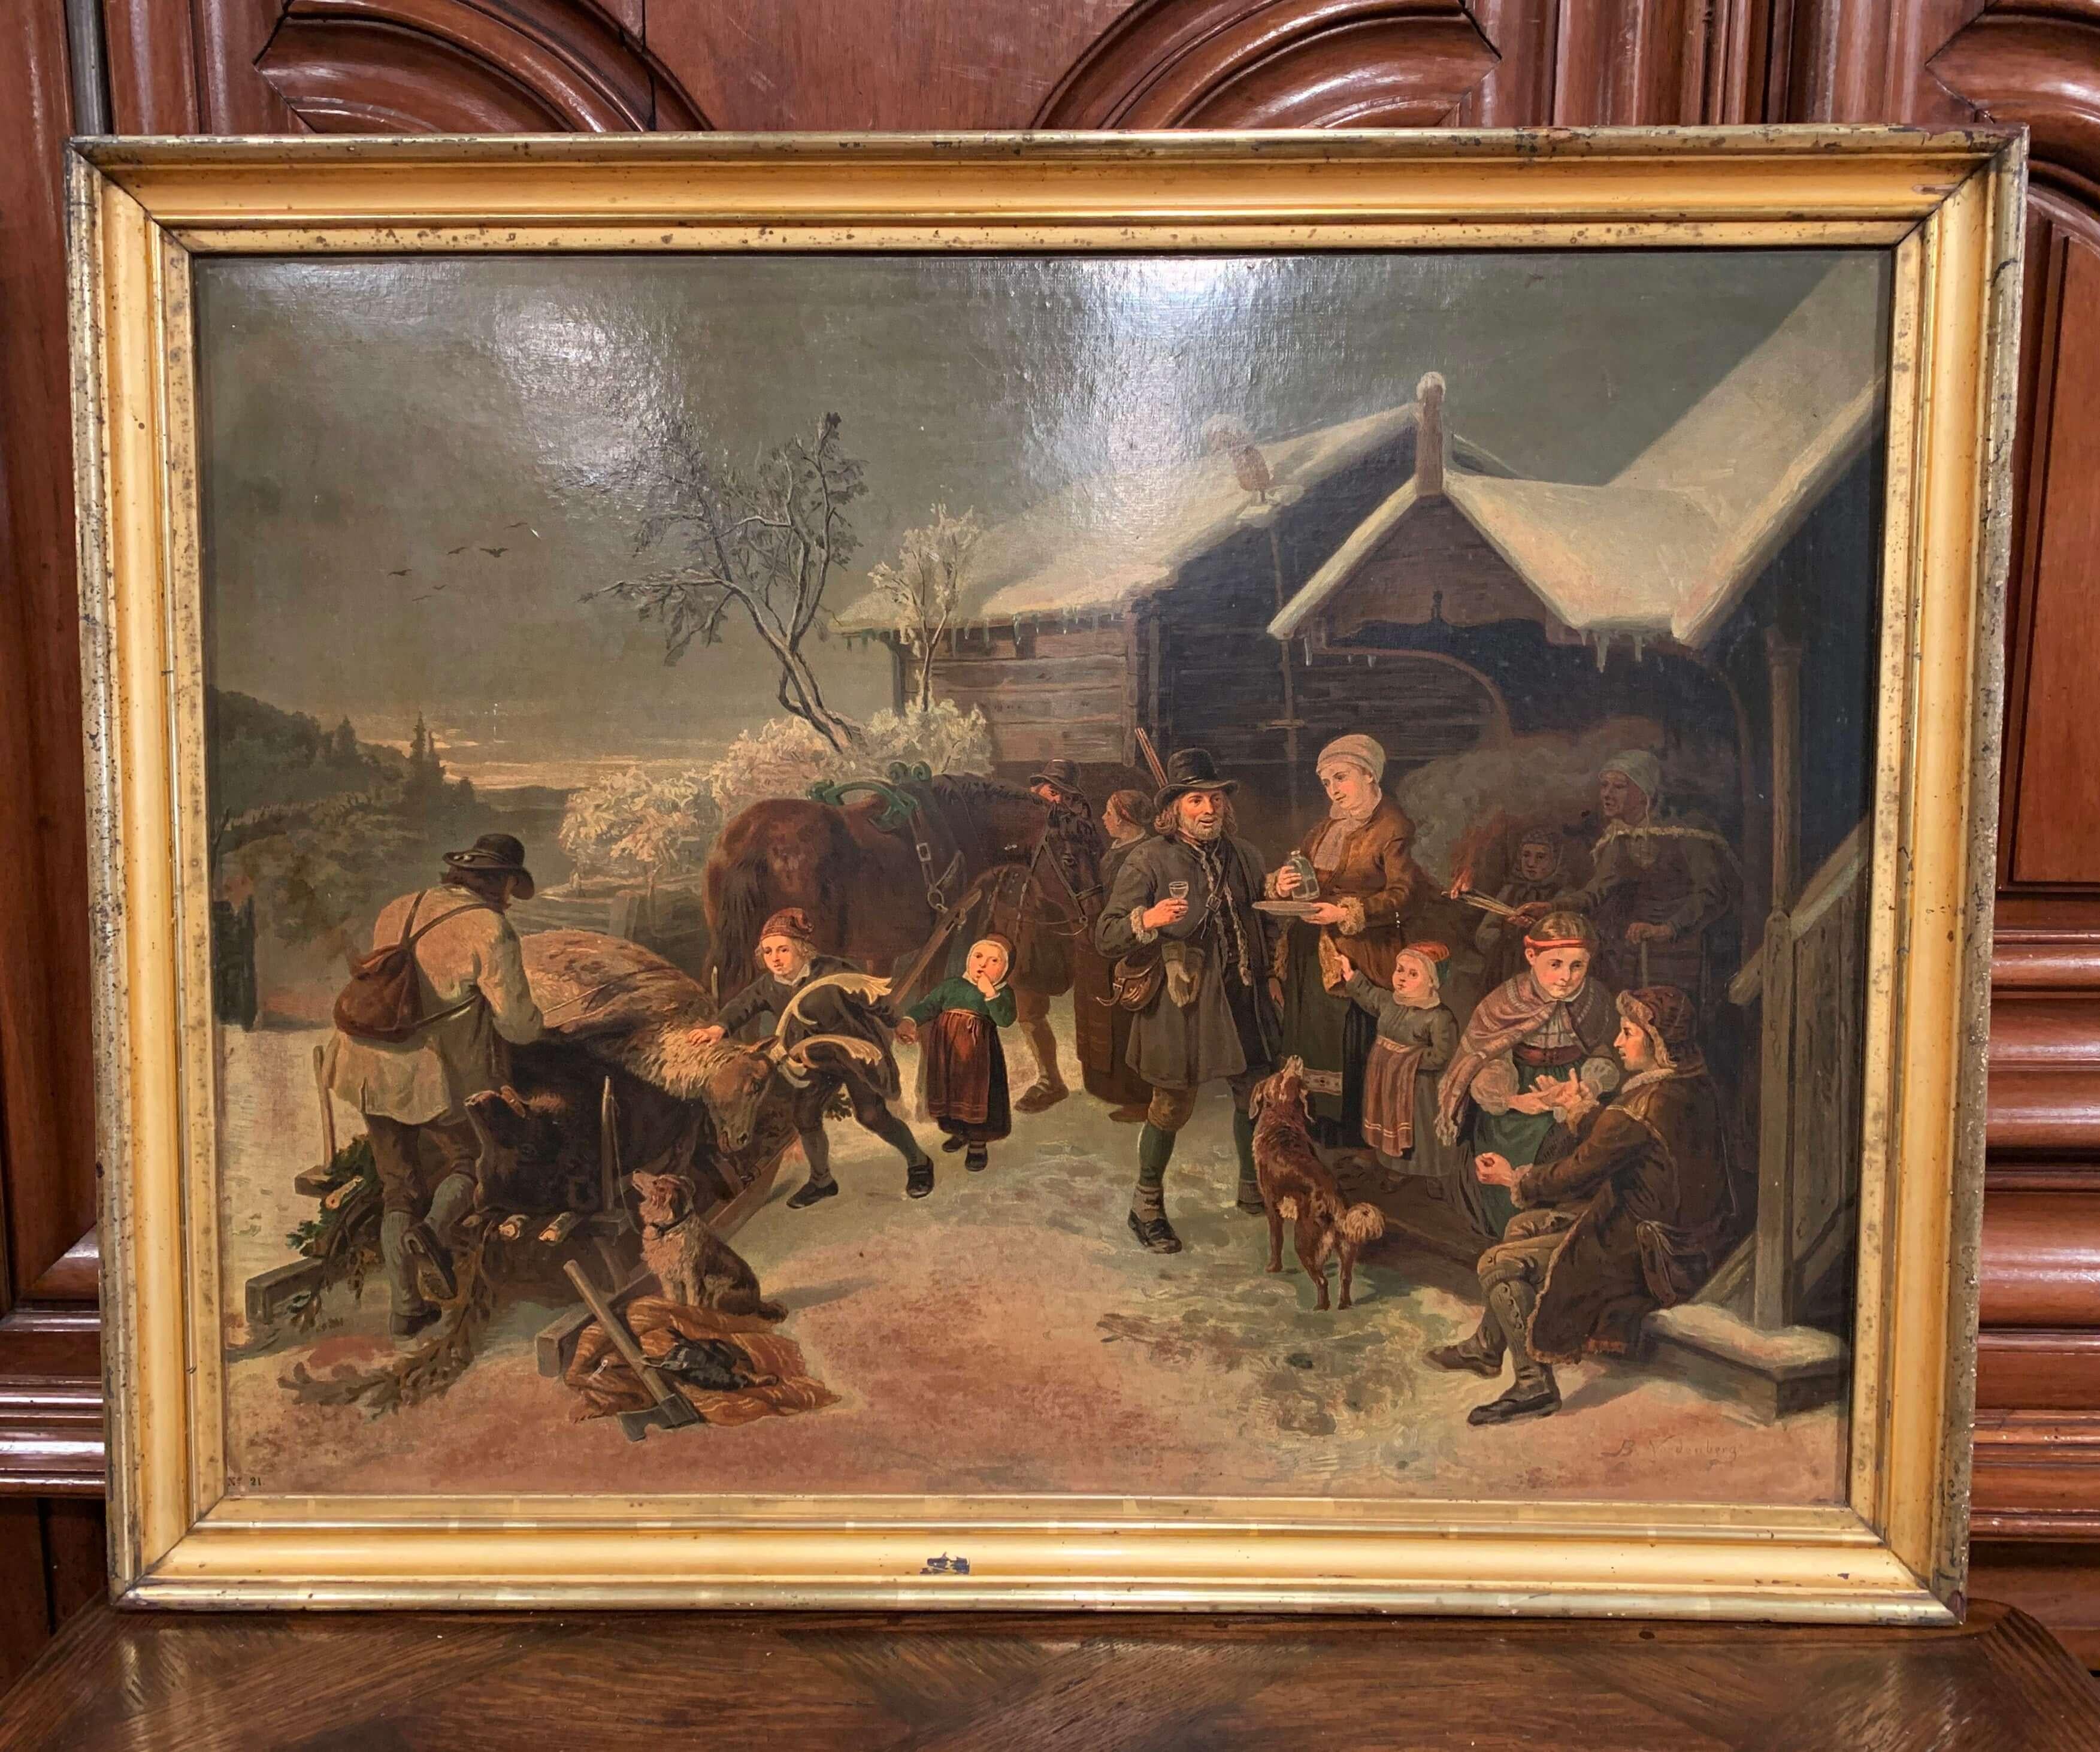 These figural countryside scenes were painted in Germany, circa 1870. Signed on the lower right by the artist B. Nordenberg, the pair of paintings are set in their original gilt frames. Both artworks depict a pastoral middle class life scene filled